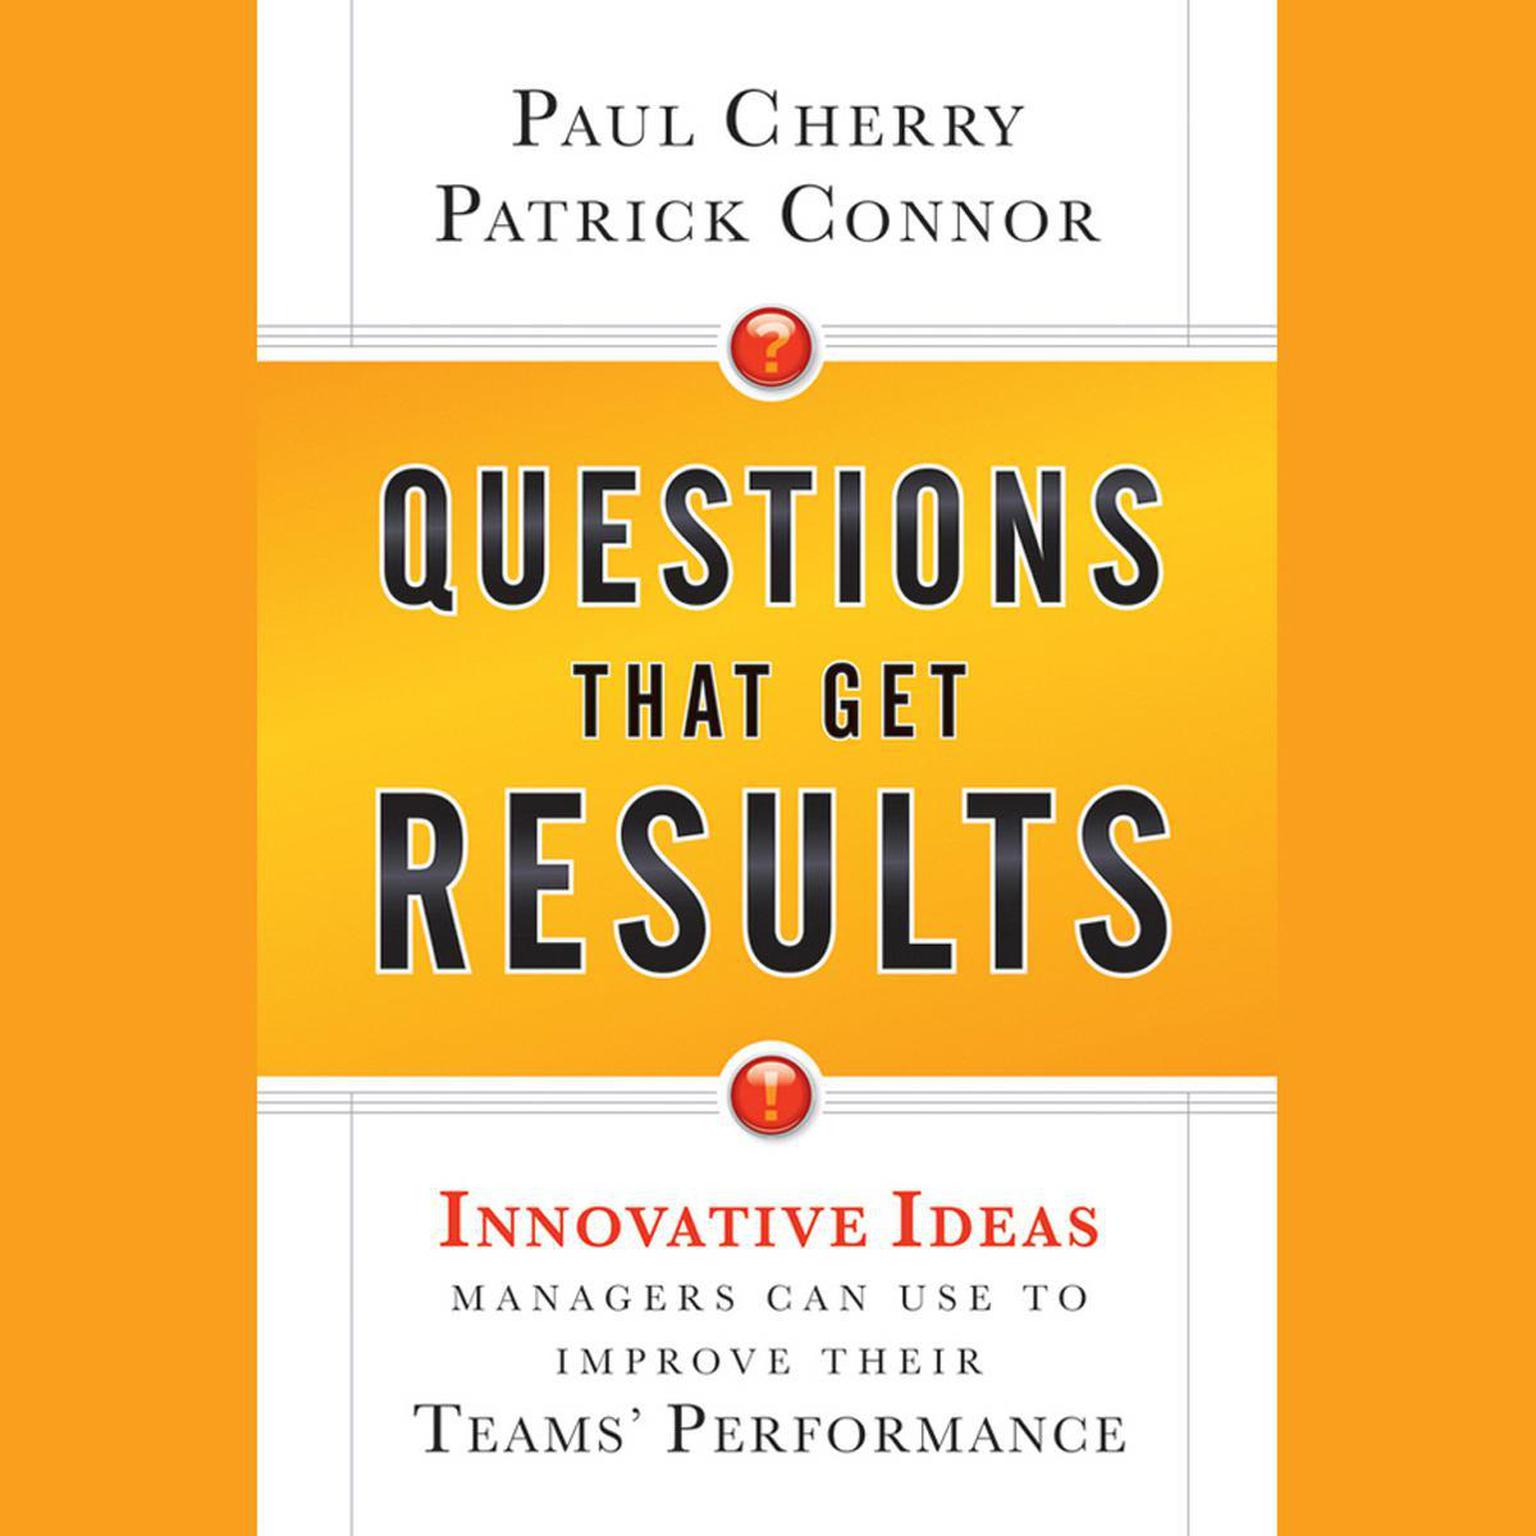 Questions That Get Results: Innovative Ideas Managers Can Use to Improve Their Teams Performance Audiobook, by Paul Cherry